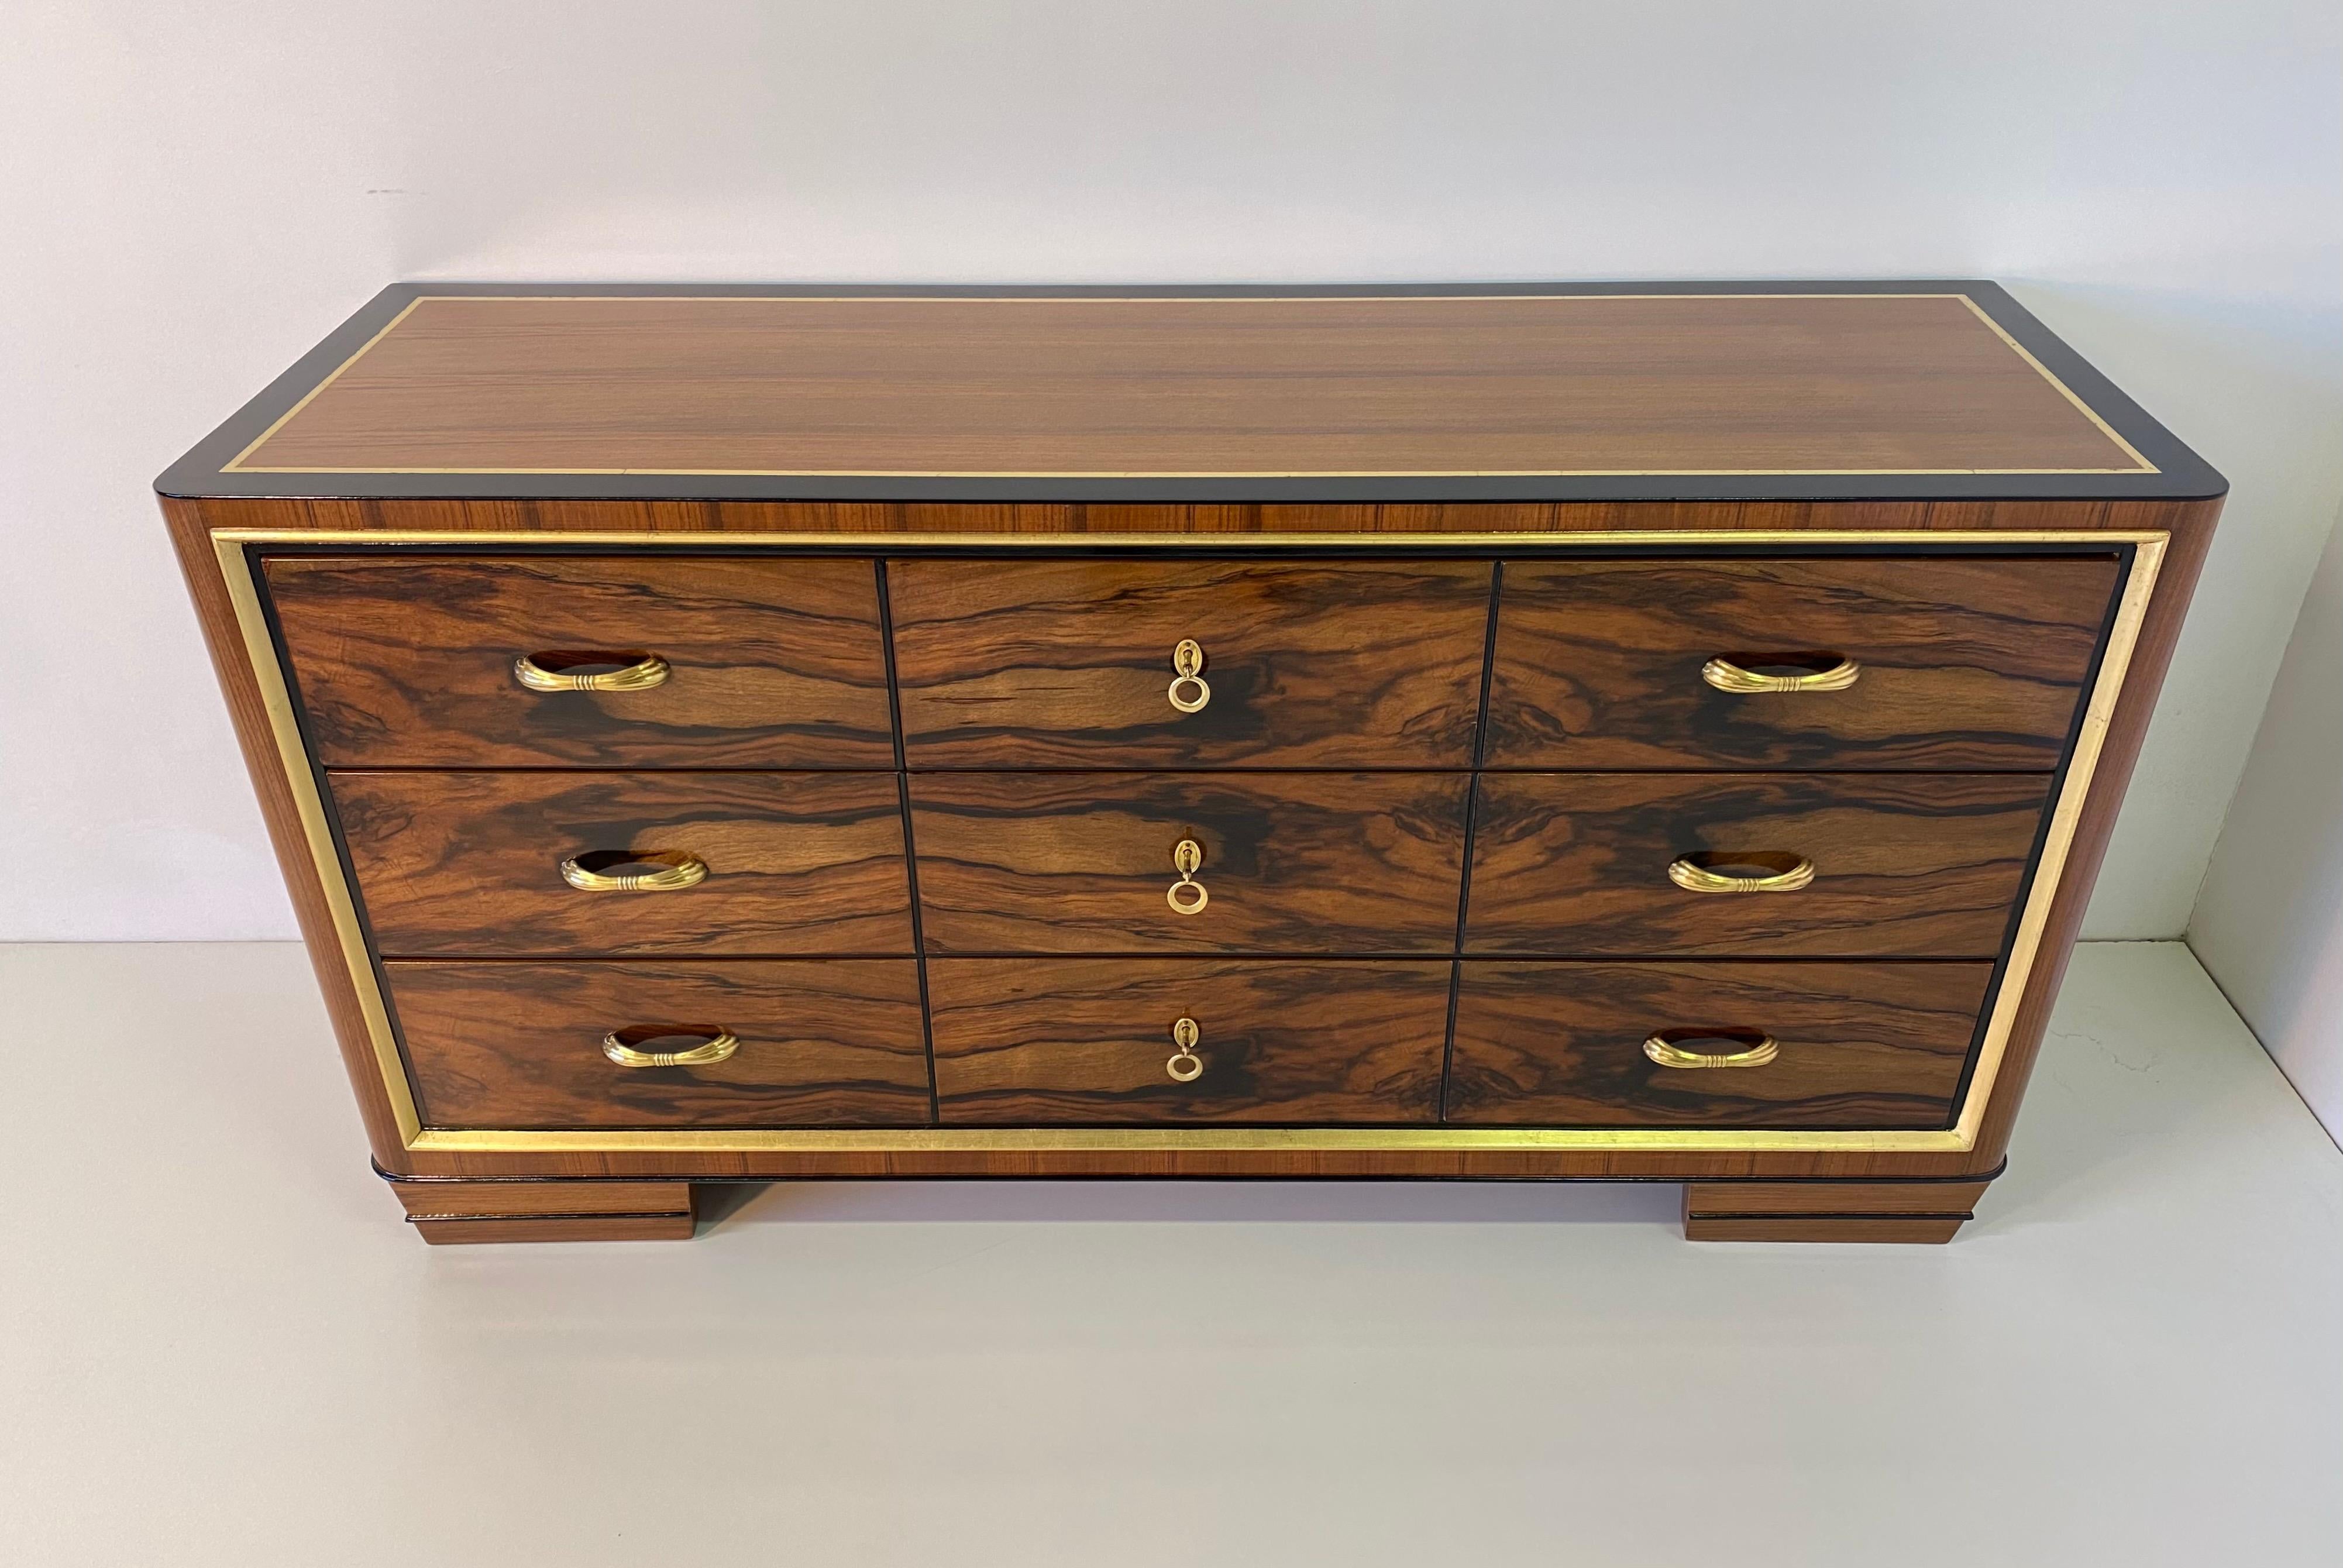 This chest of drawers was produced in Italy in the 1930s, it is completely covered in walnut briar while the details are in gold leaf and black lacquer.
The handles and keys are made of brass.
Completely restored.